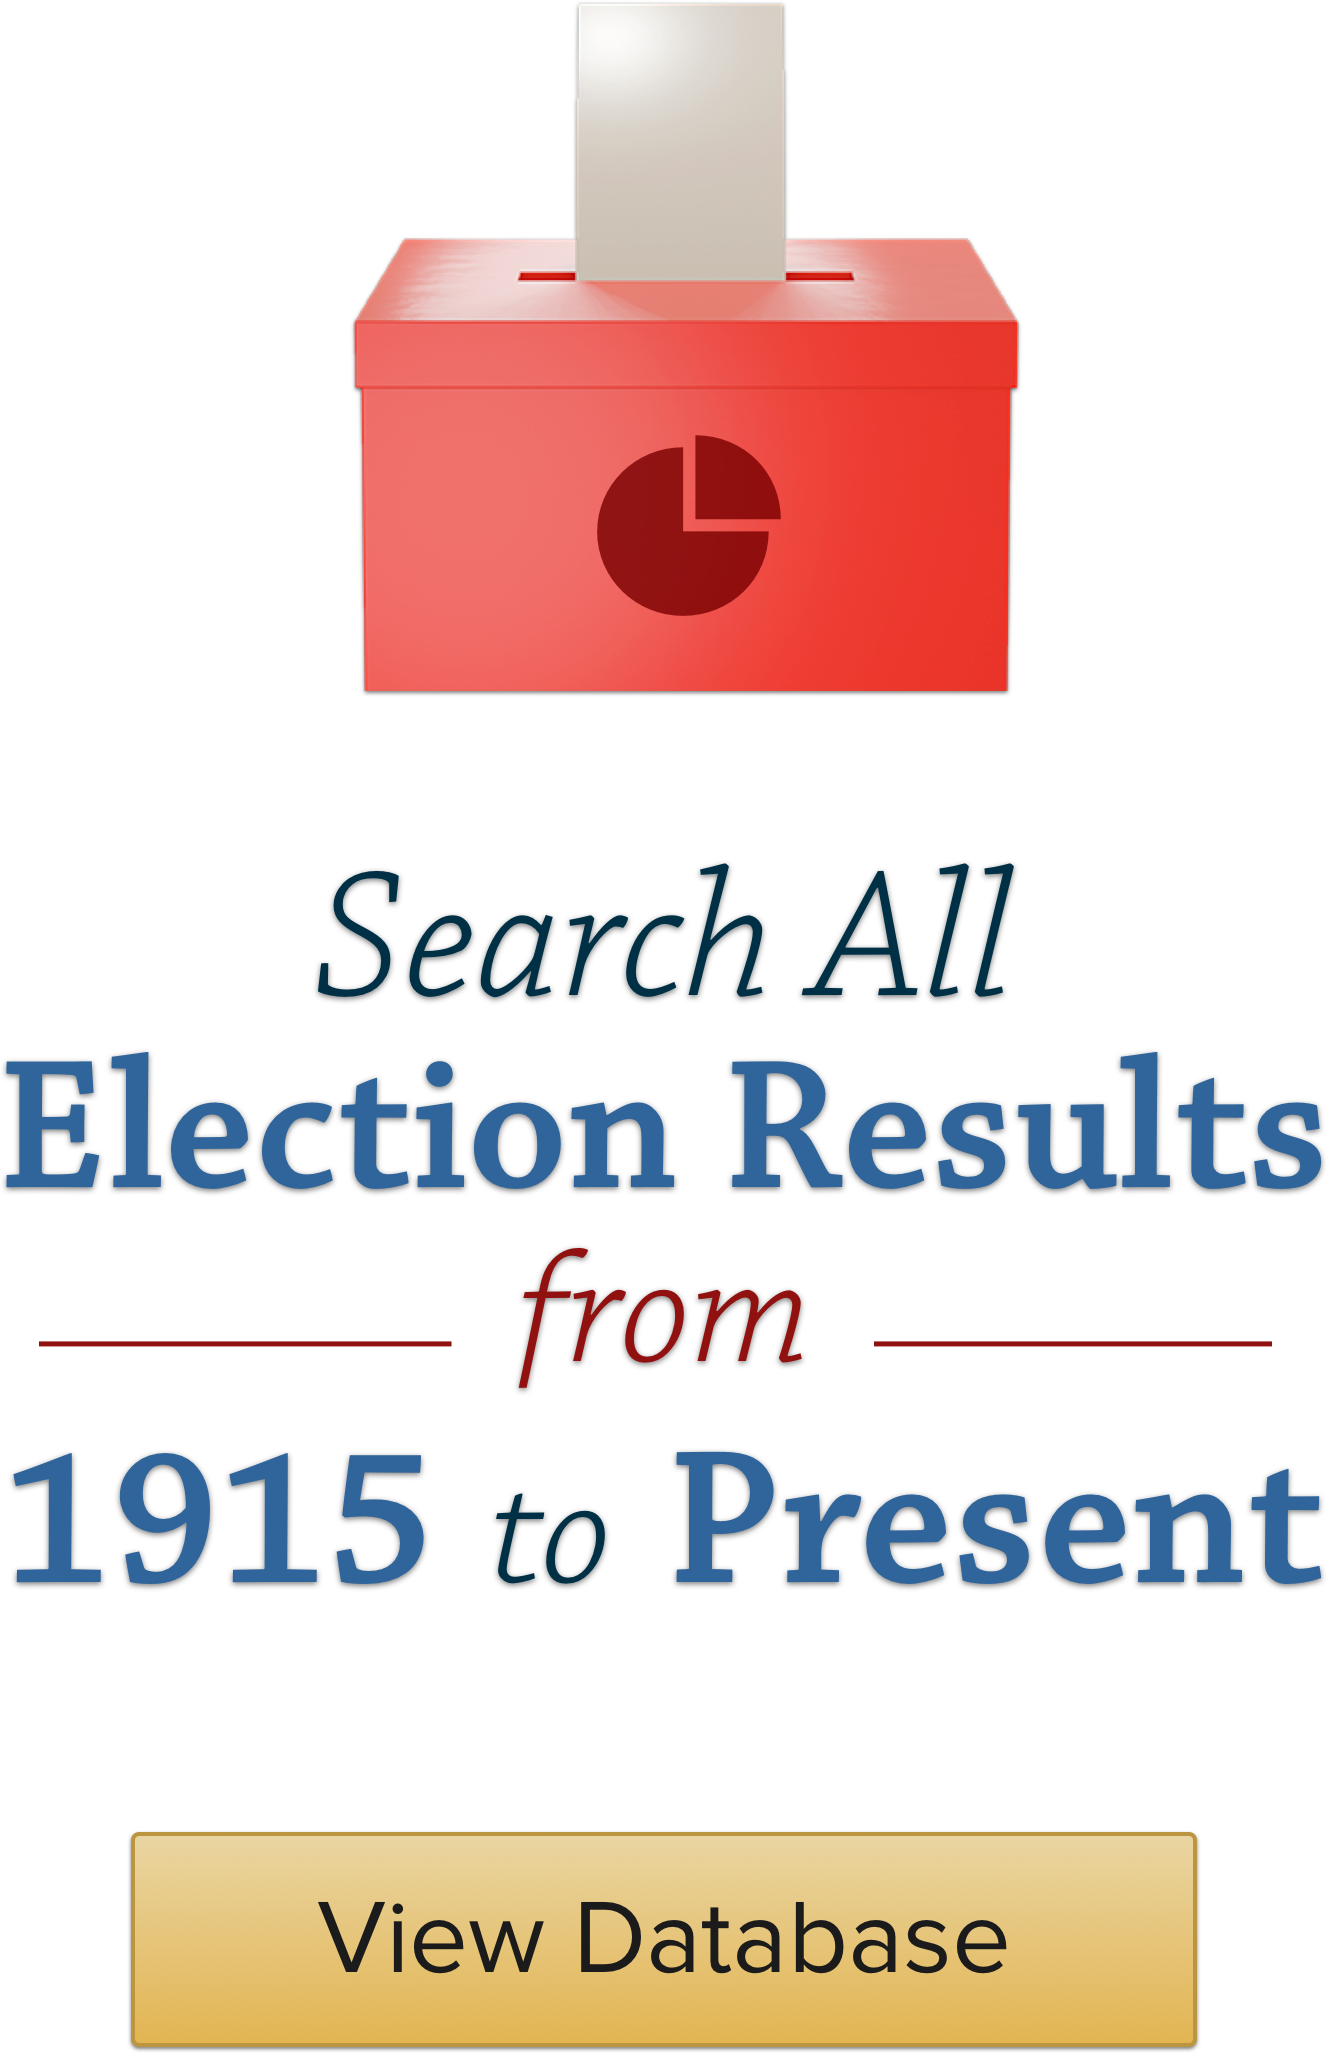 Search all Election Results from 2015 to Present